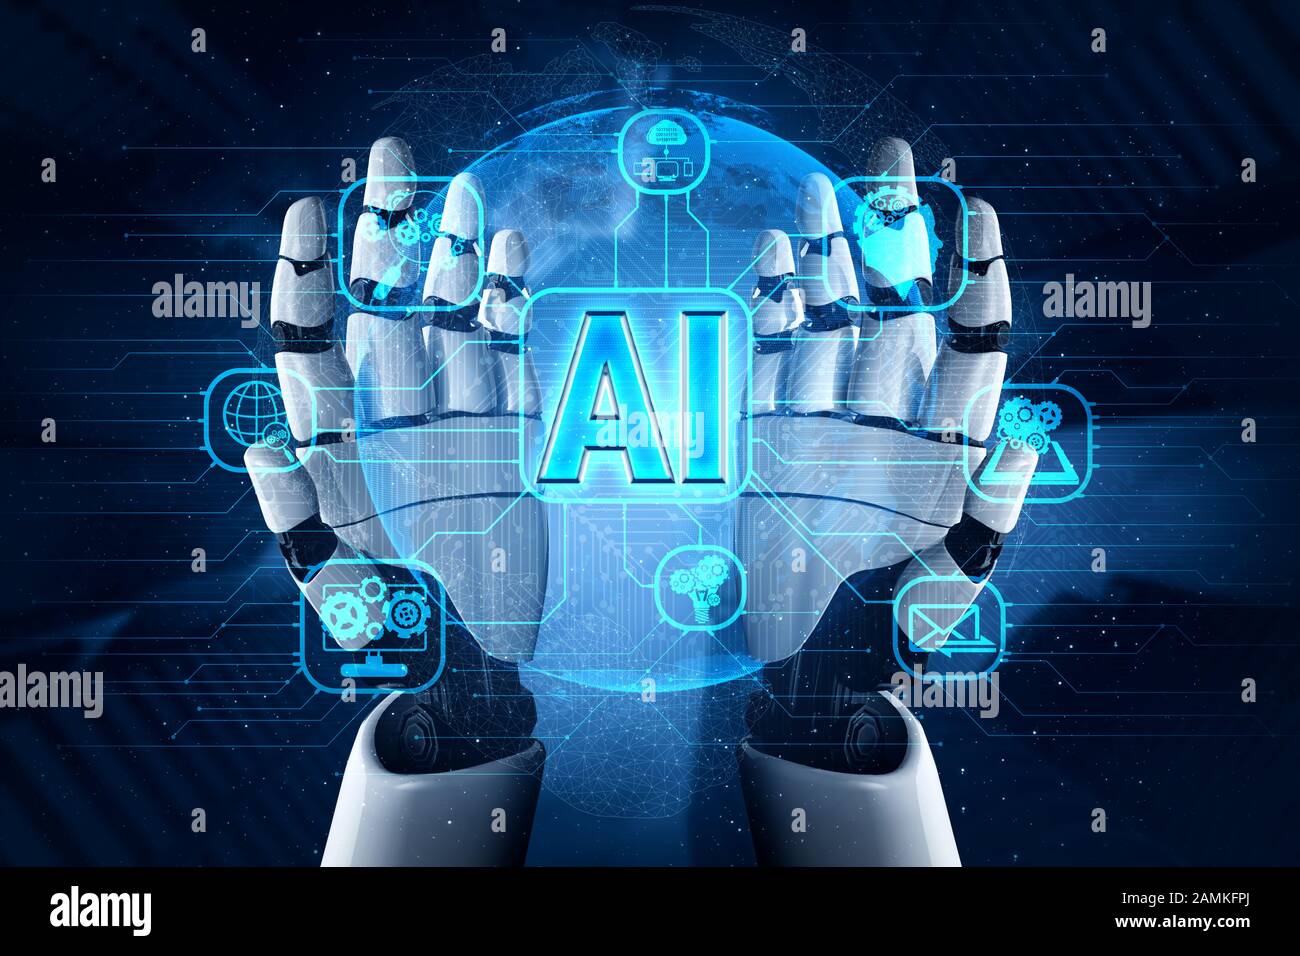 Artificial intelligence AI research of robot and cyborg development for future of people living. Digital data mining and machine learning technology d Stock Photo